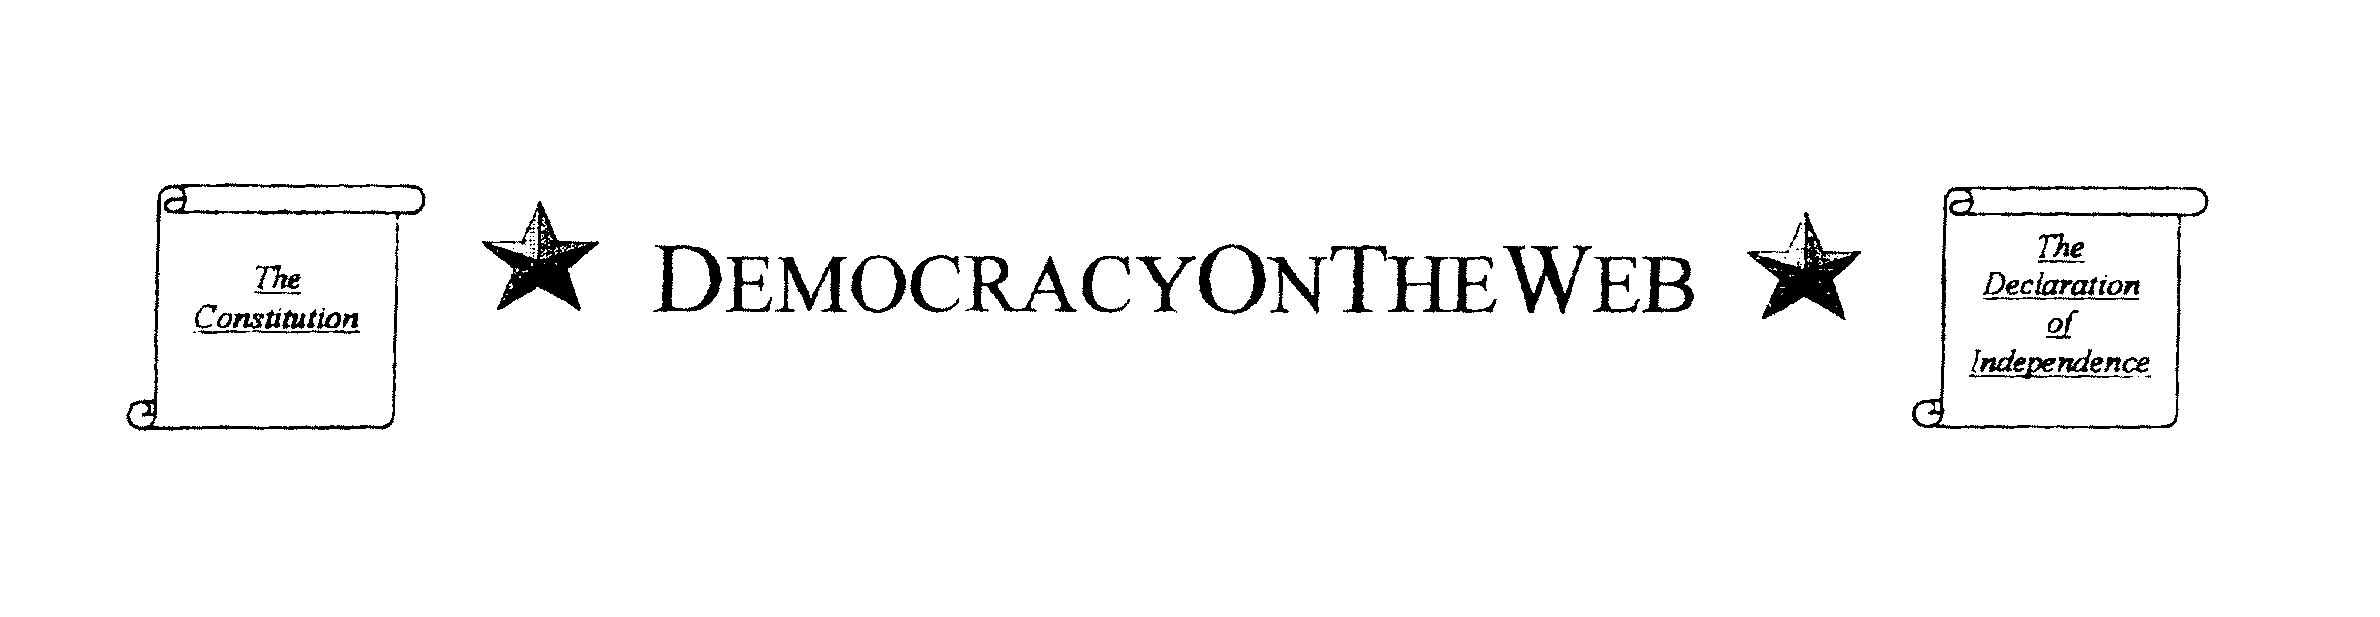  DEMOCRACYONTHEWEB THE CONSTITUTION THE DECLARATION OF INDEPENDENCE